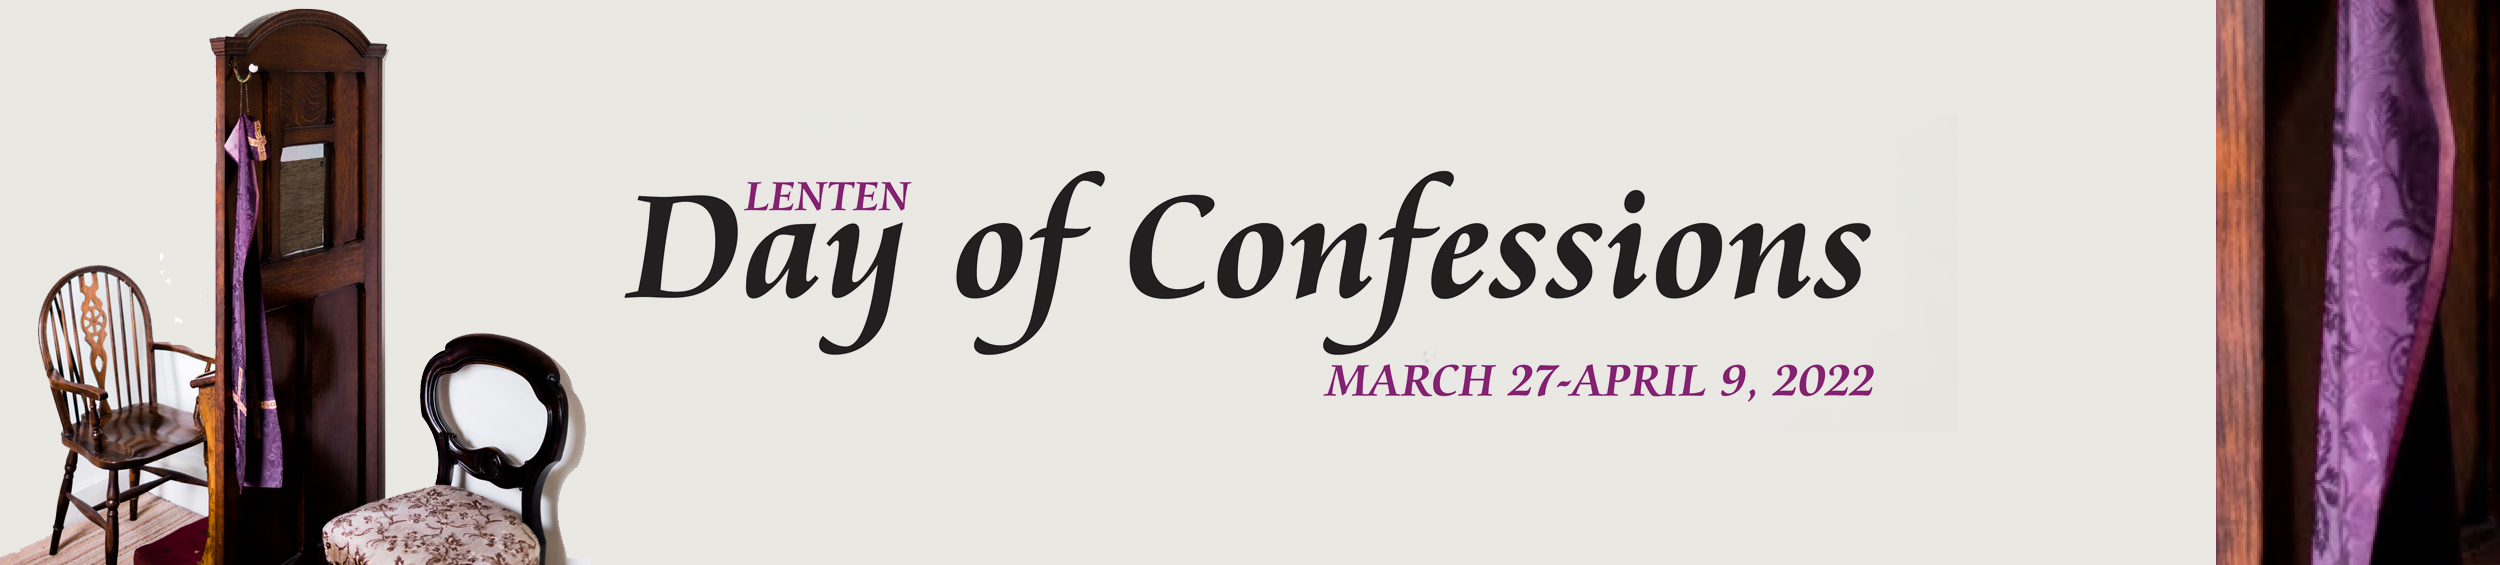 Lenten Day of Confessions 2022